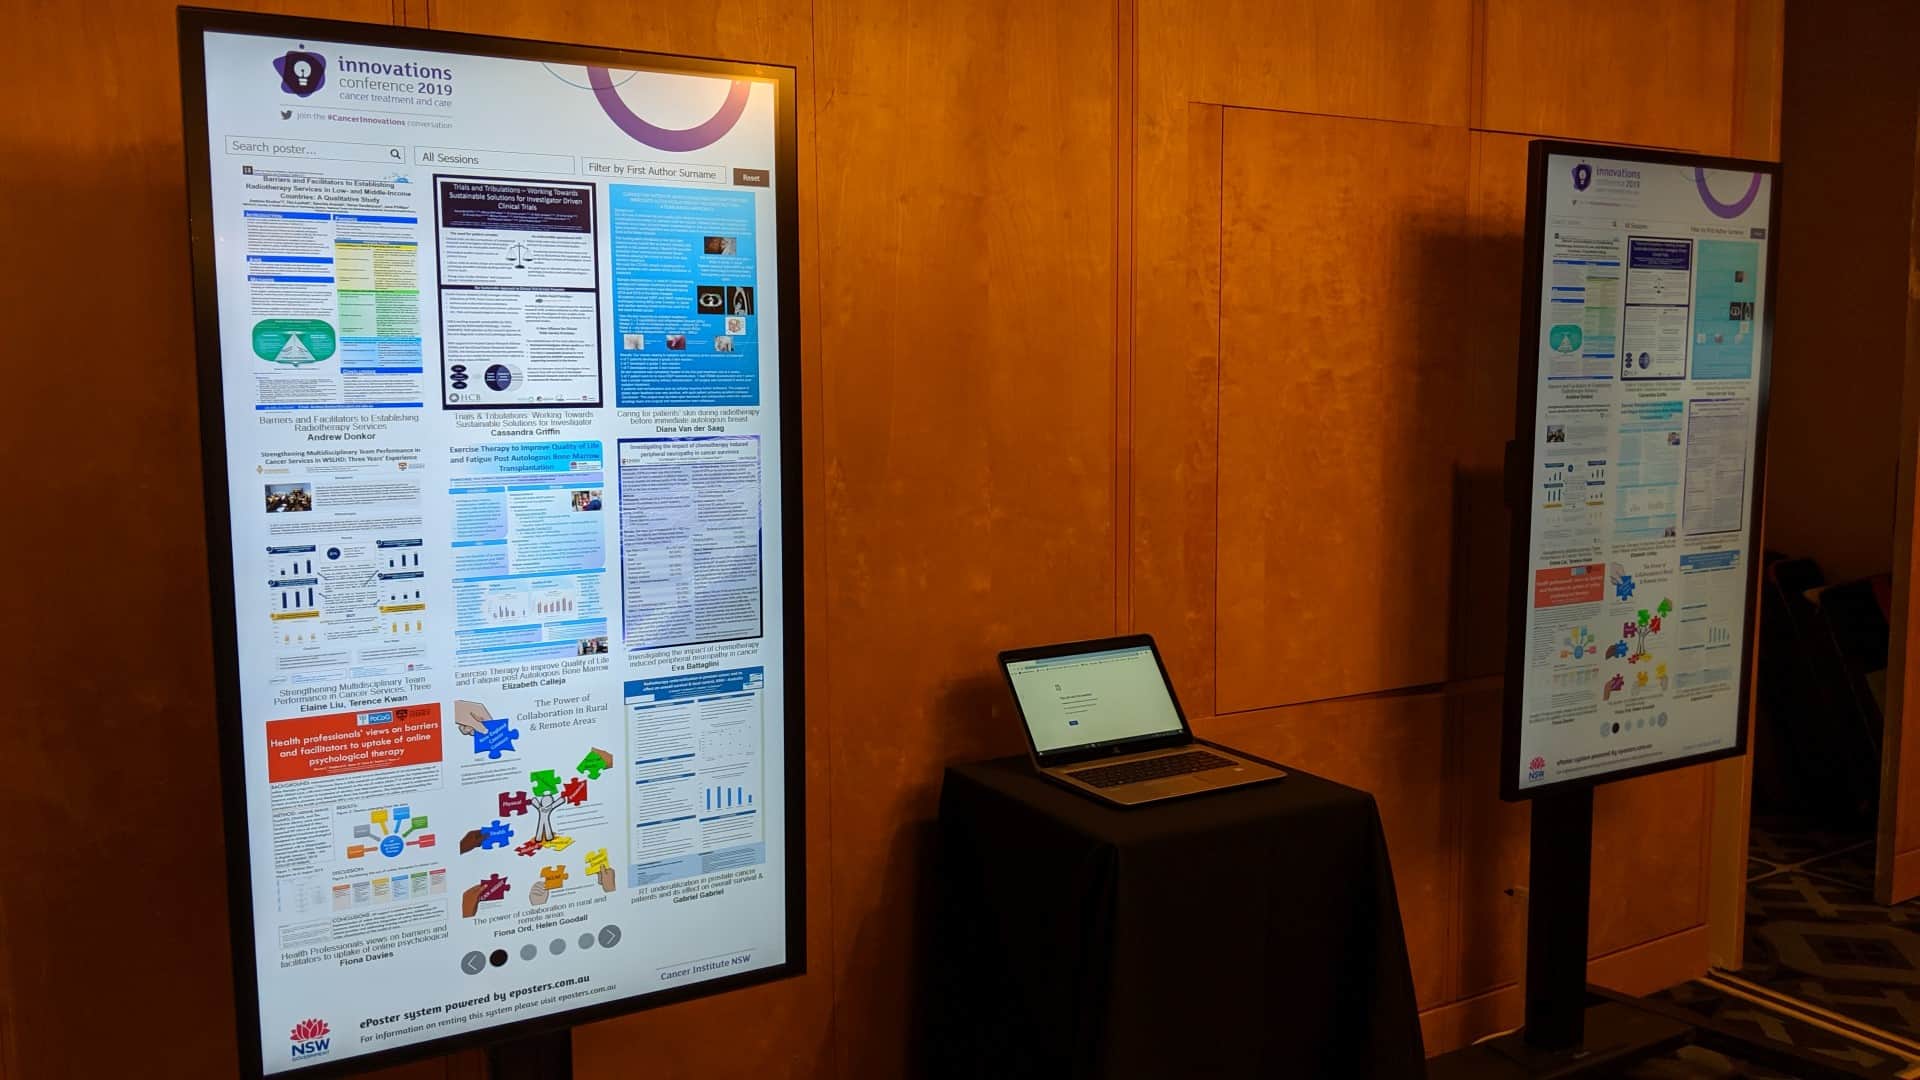 Advertise Me Interactive Digital Signage ePosters Cancer Institute NSW Conference 7